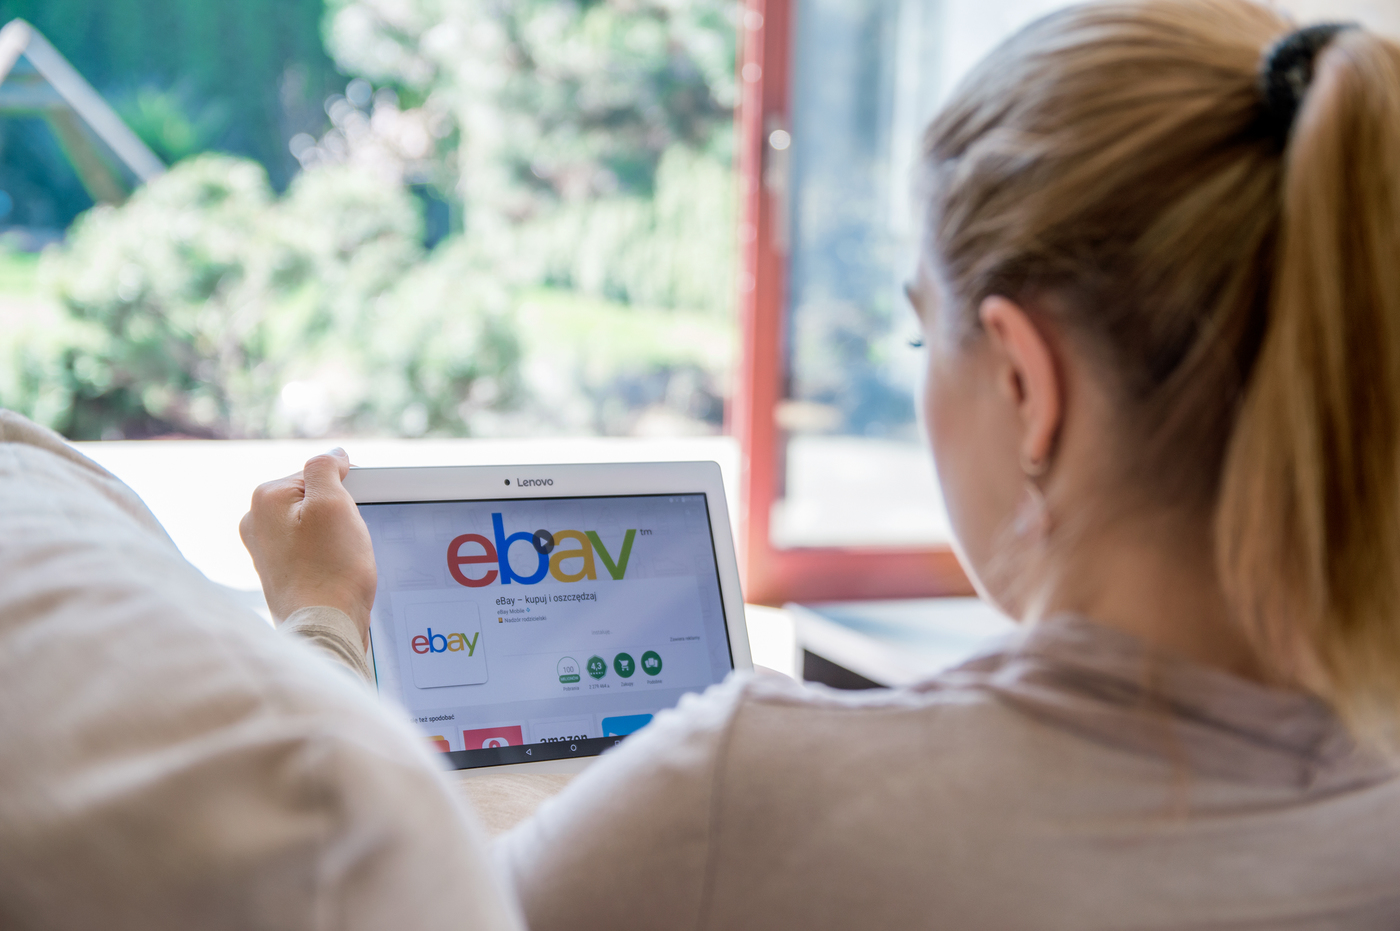 Ebay sellers are complaining about high direct debit fees